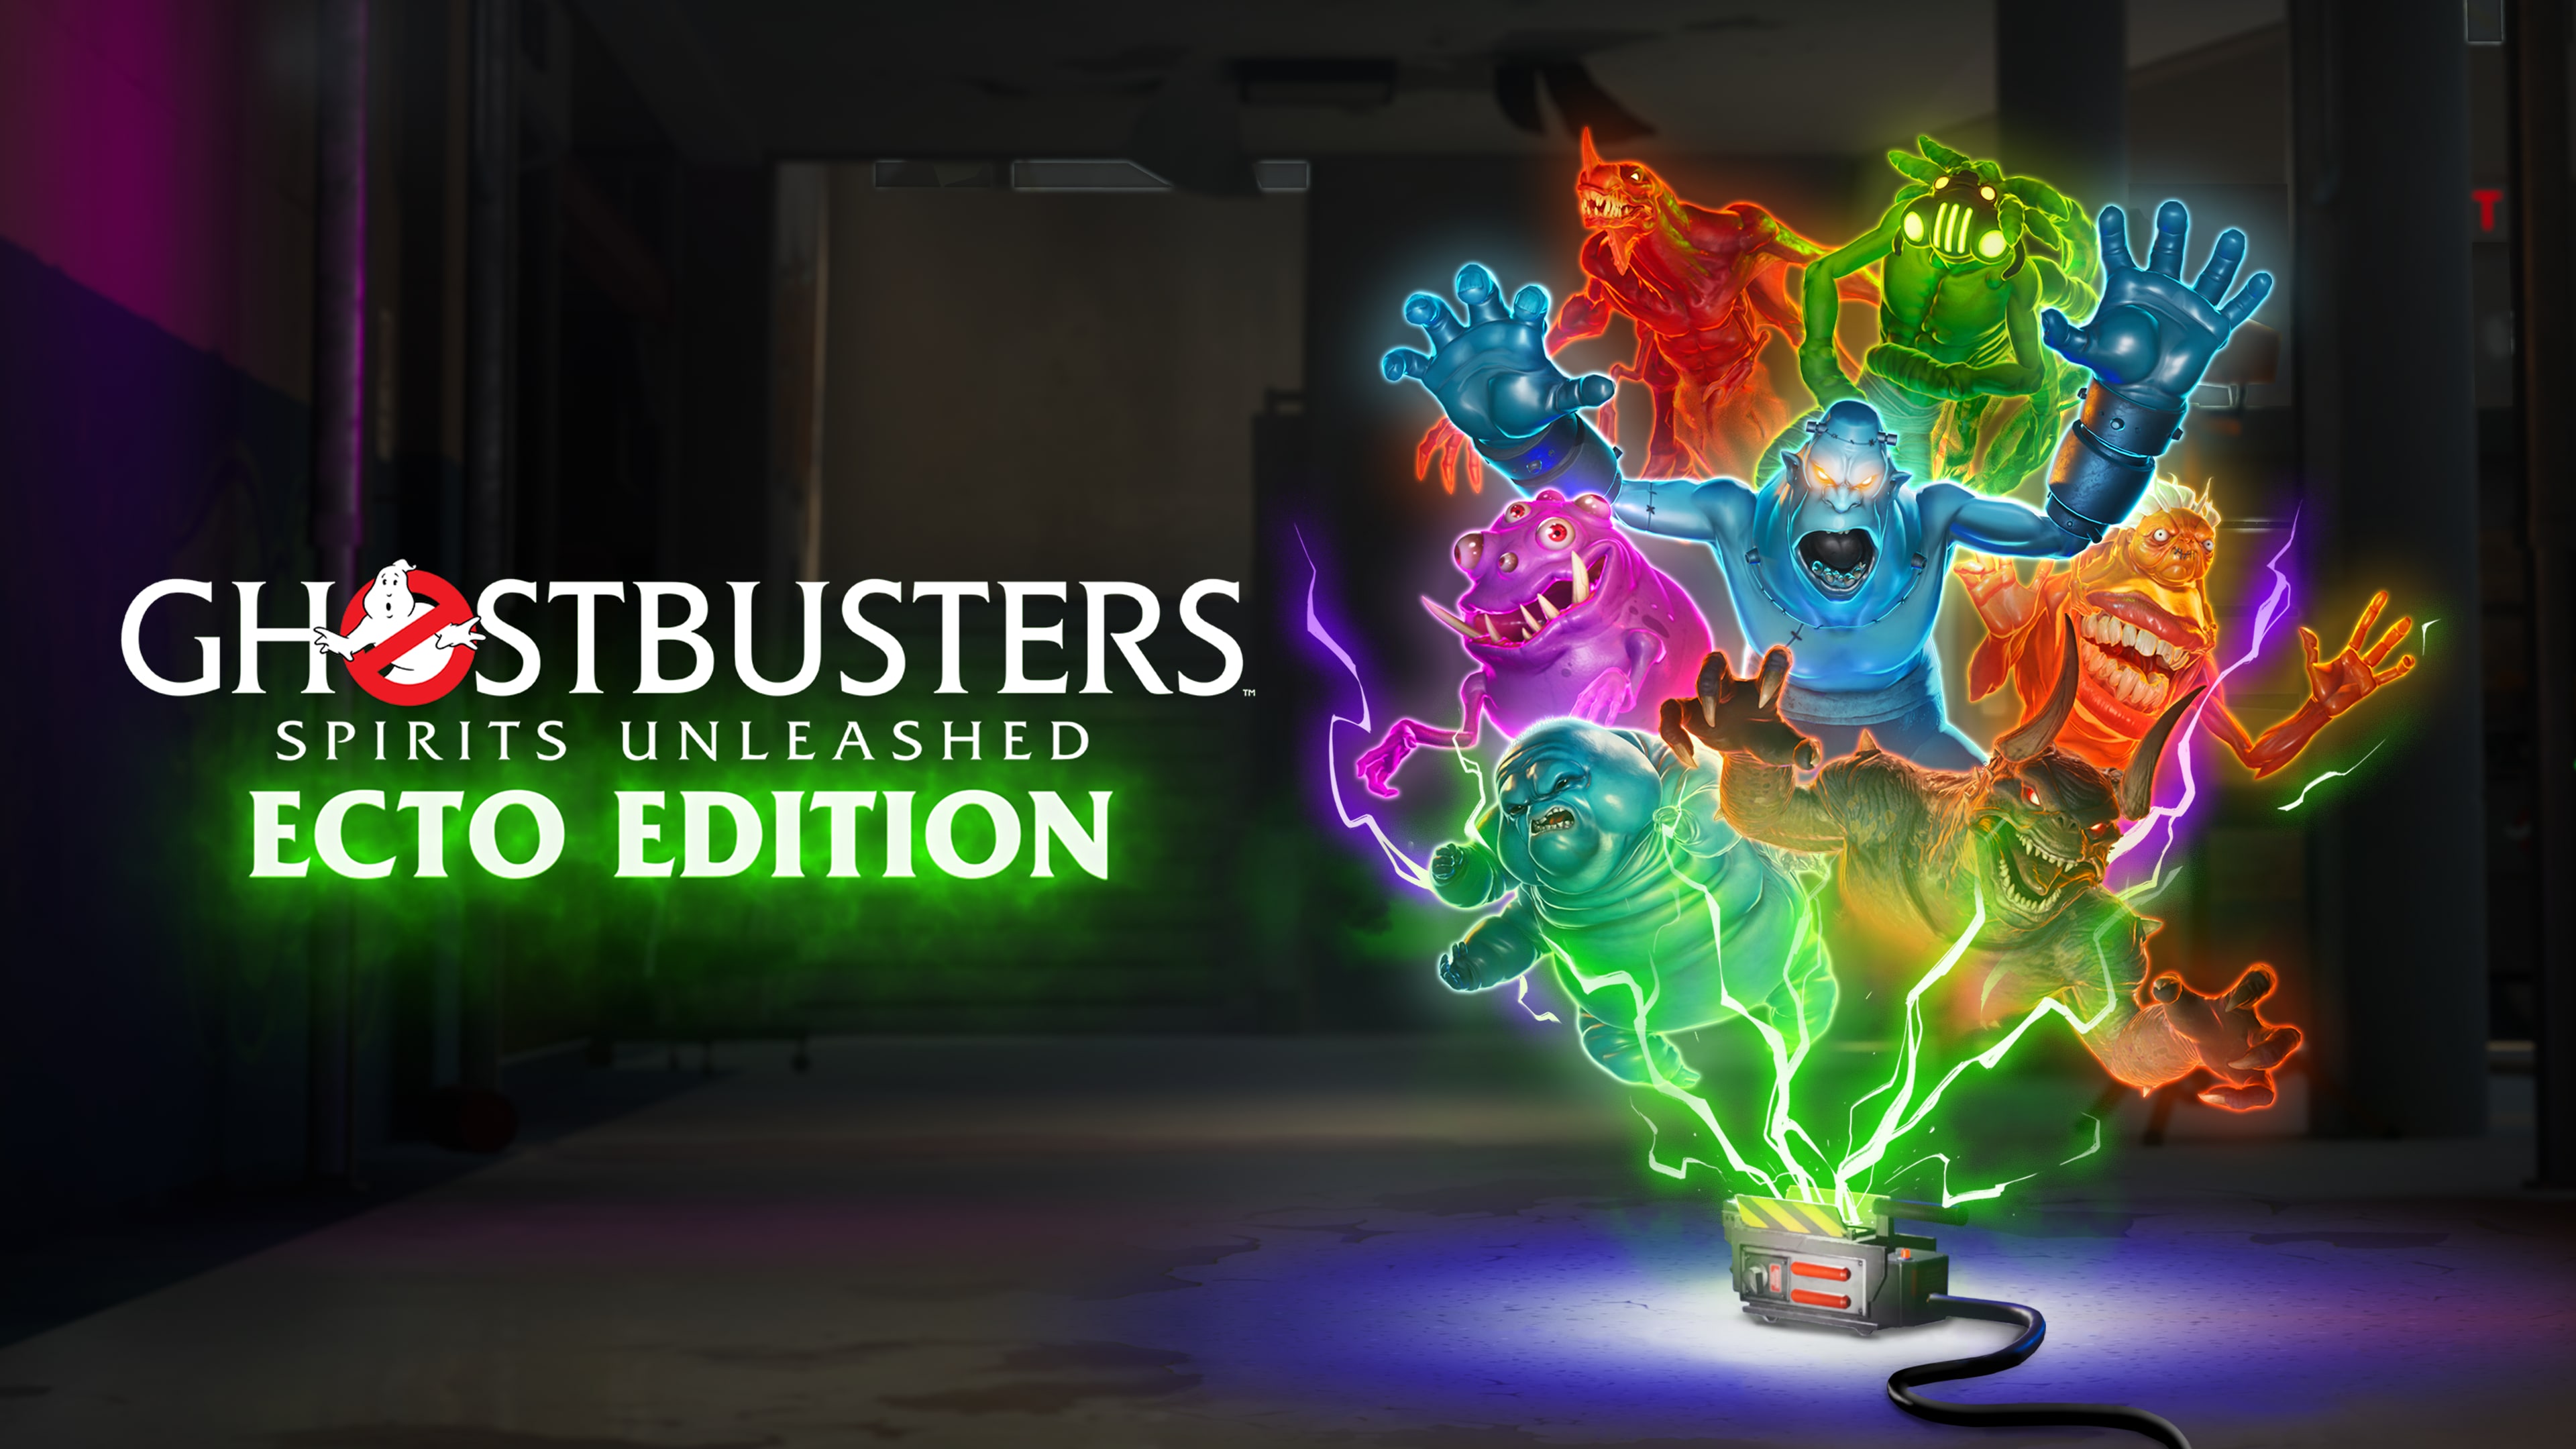 Ghostbusters: Spirits Unleashed Ecto Edition (韓文, 英文, 繁體中文, 日文)